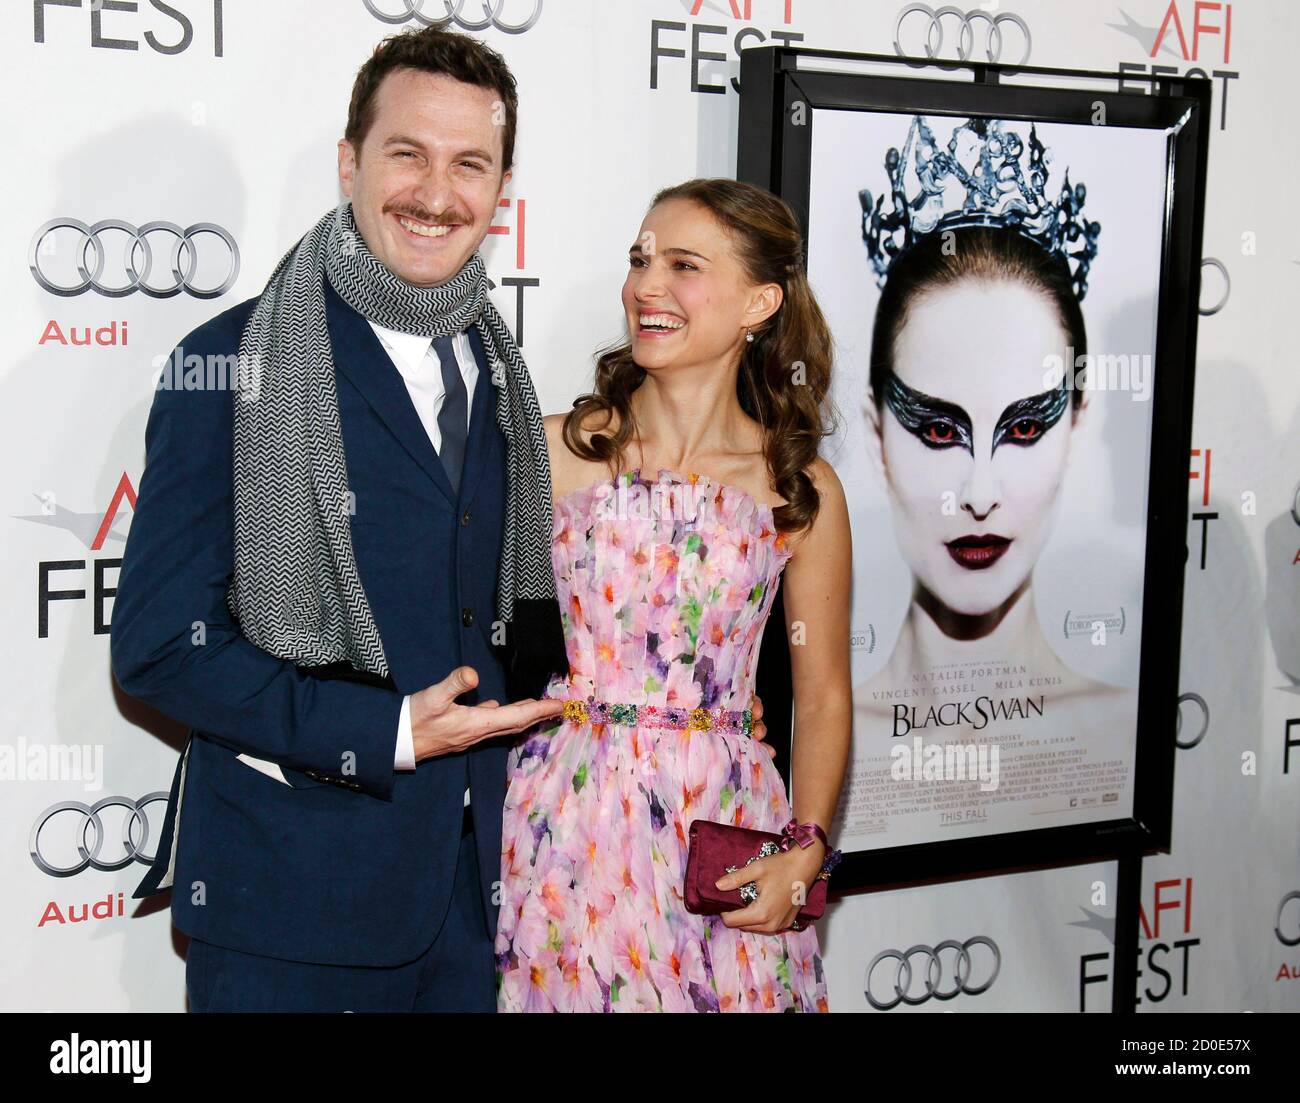 Director Darren Aronofsky (L) and cast member Natalie Portman pose together before a screening of the film "Black Swan" at the closing night of Fest 2010 in Hollywood, California November